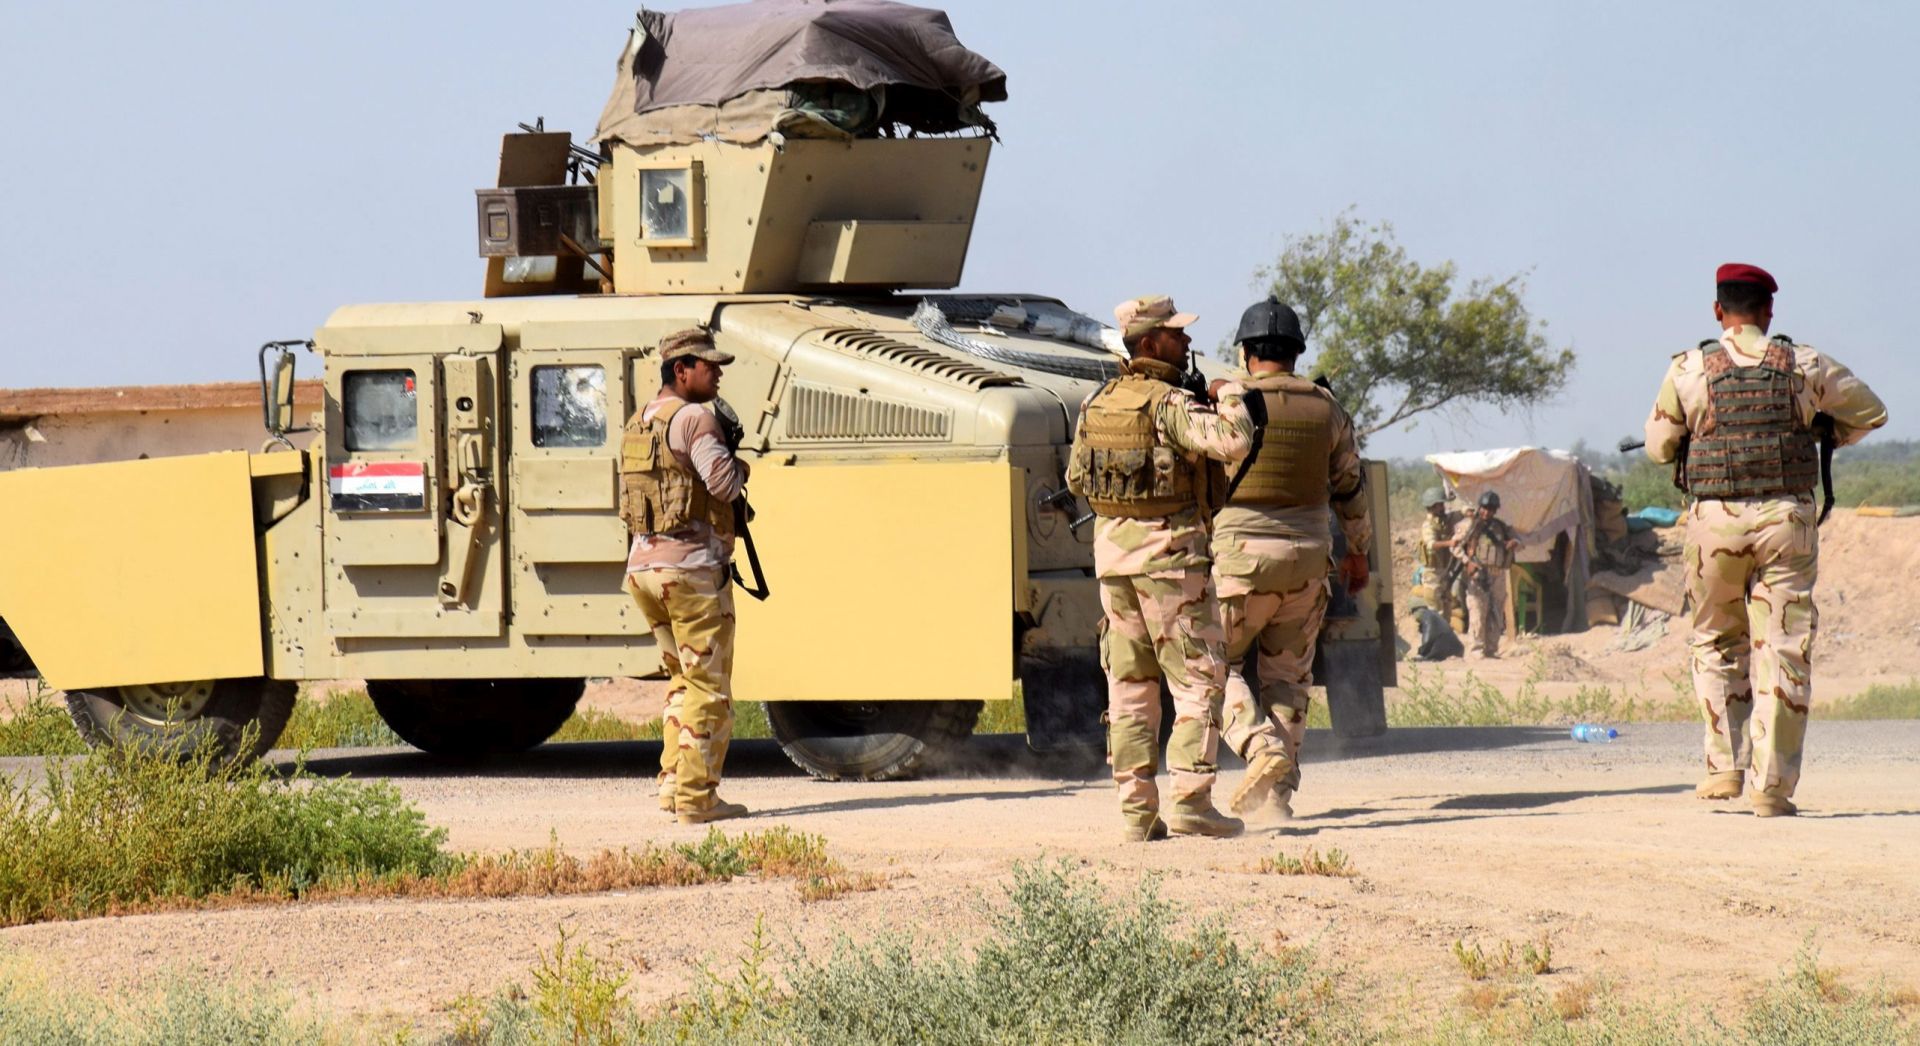 epa05325676 Iraqi soldiers take up position during a military operation southwest of Fallujah city, western Iraq, 23 May 2016. The Iraqi Army on 23 May began an offensive to liberate the city of Fallujah, located around 50 kilometers east of Baghdad in the western province of Al Anbar, from the hands of the Islamic State (IS).  EPA/NAWRAS AAMER